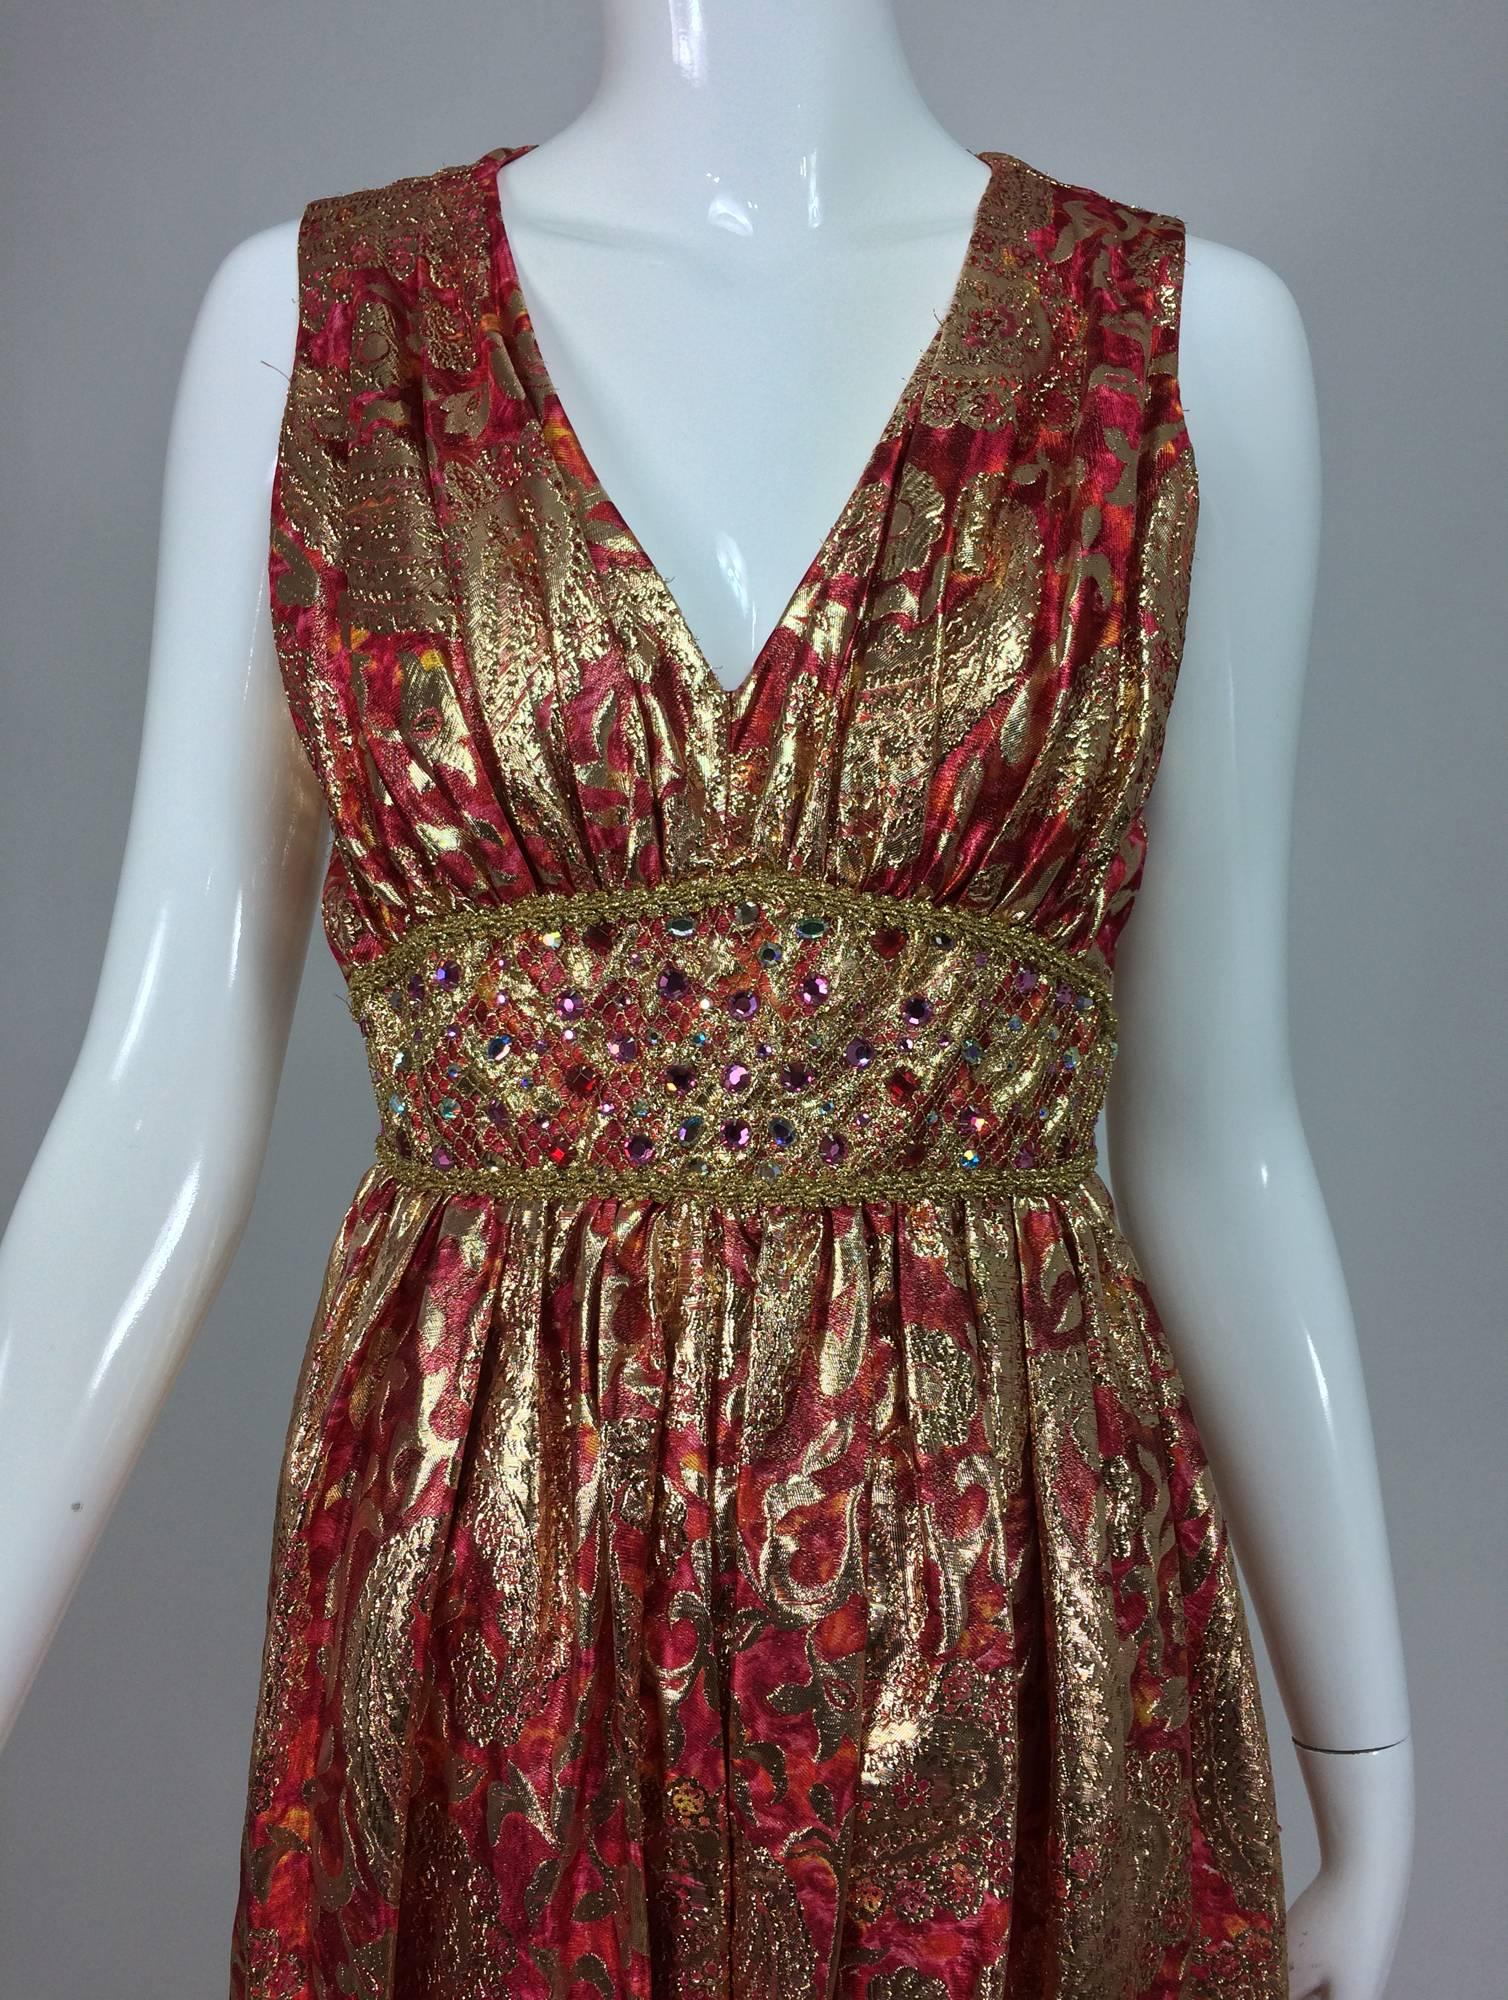 Malcolm Starr jeweled coral and gold metallic lame harem jumpsuit 1970s...This is an amazing piece and one to make an entrance in! Plunge neckline jumpsuit has a fitted waist that is decorated with jewels and gold net at the front...The legs are